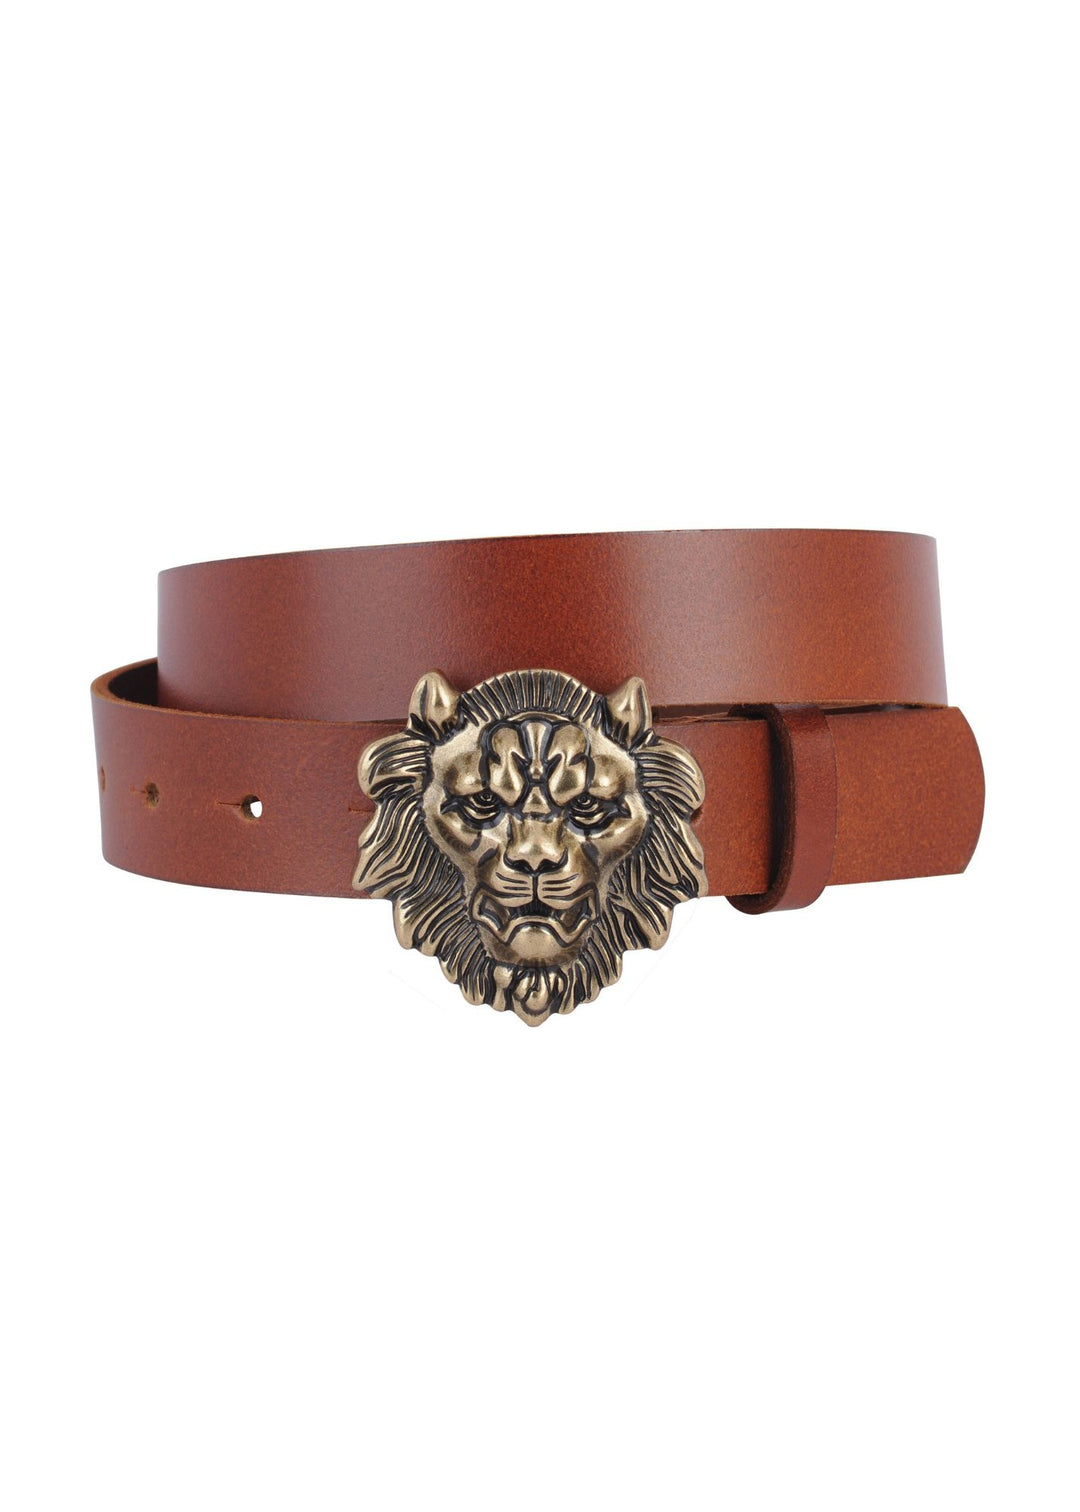 Most Wanted Lion Buckle Leather Belt (Tan)